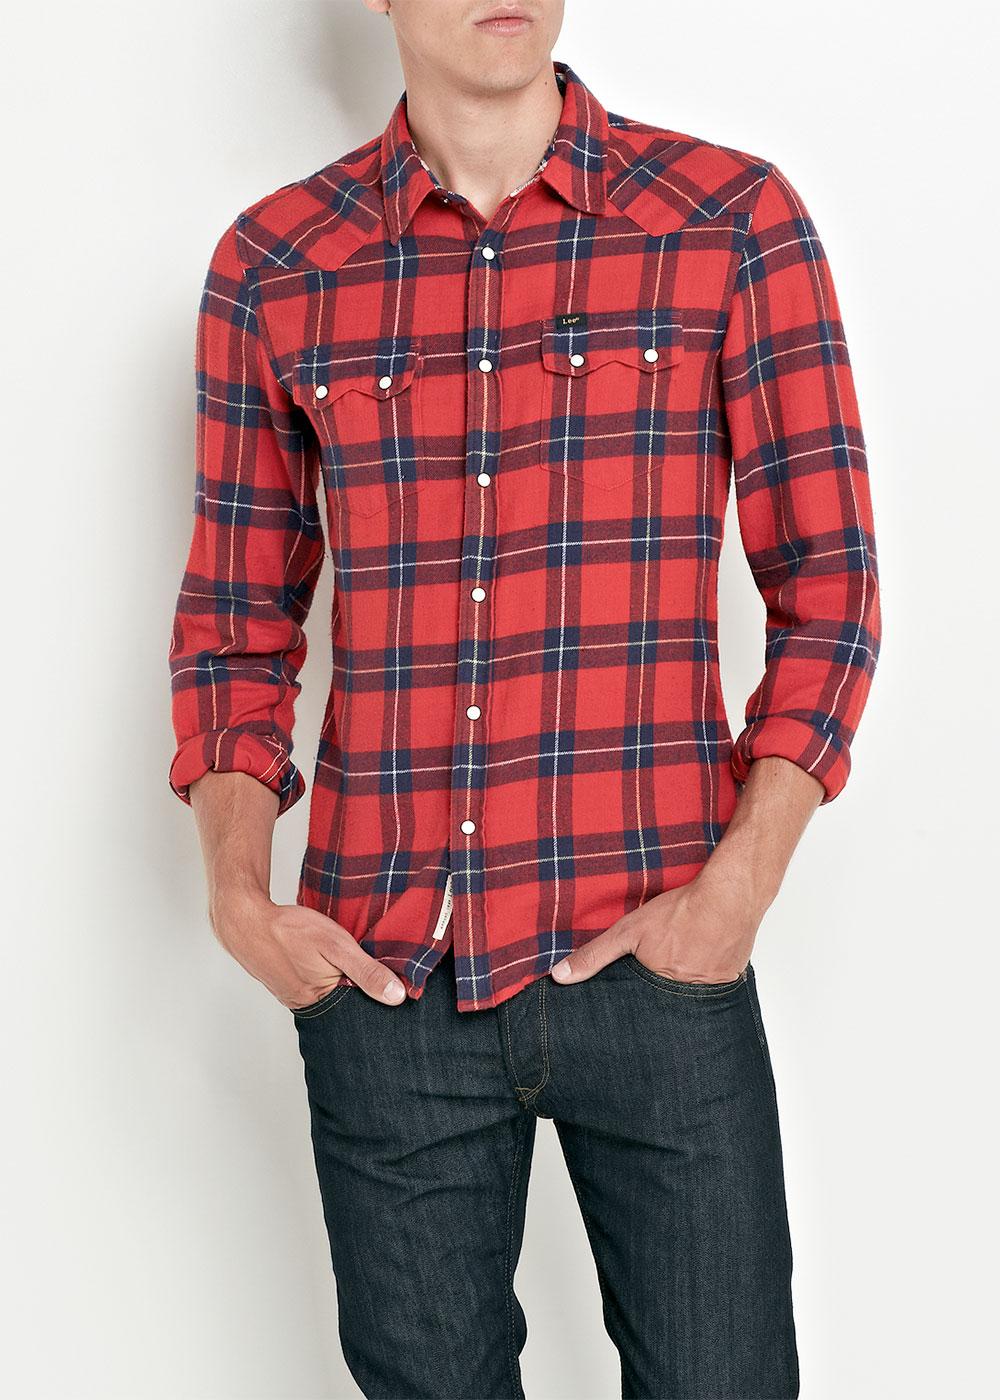 LEE Rider Retro Mod Brushed Cotton Check Shirt in Red